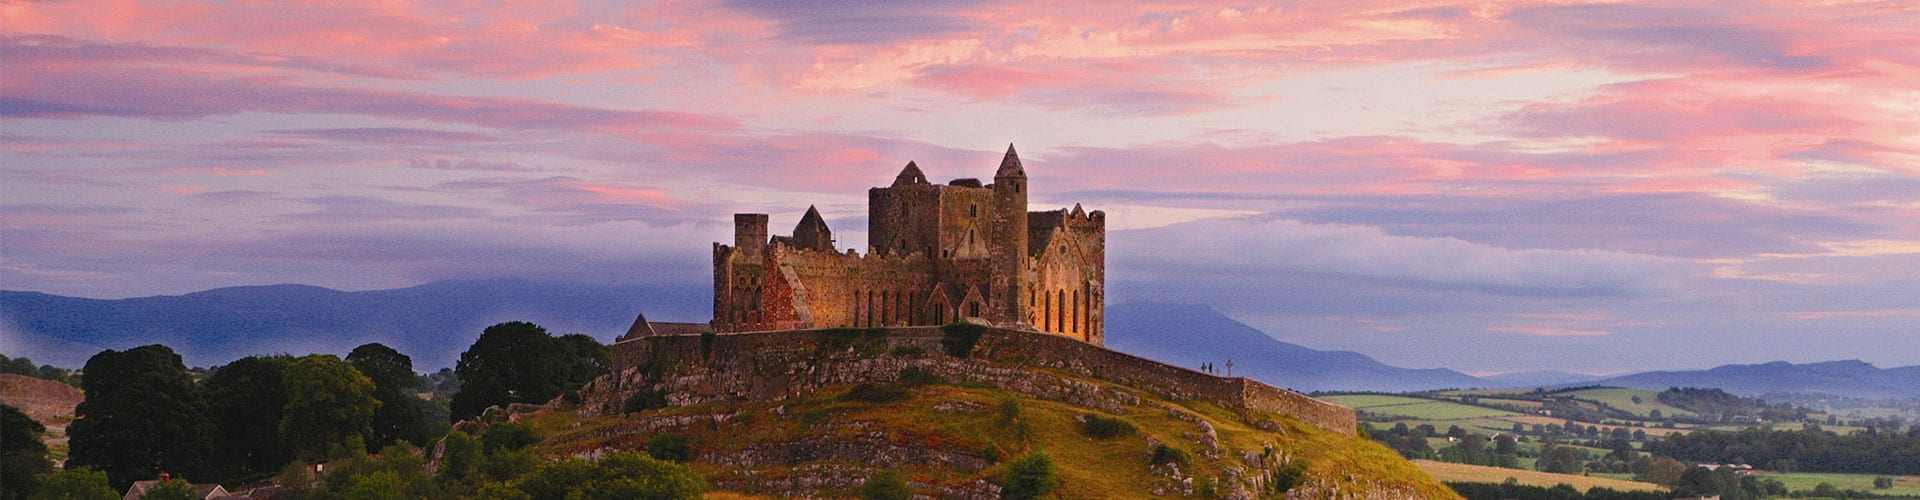 Rock Of Cashel - Tipperary Tourism